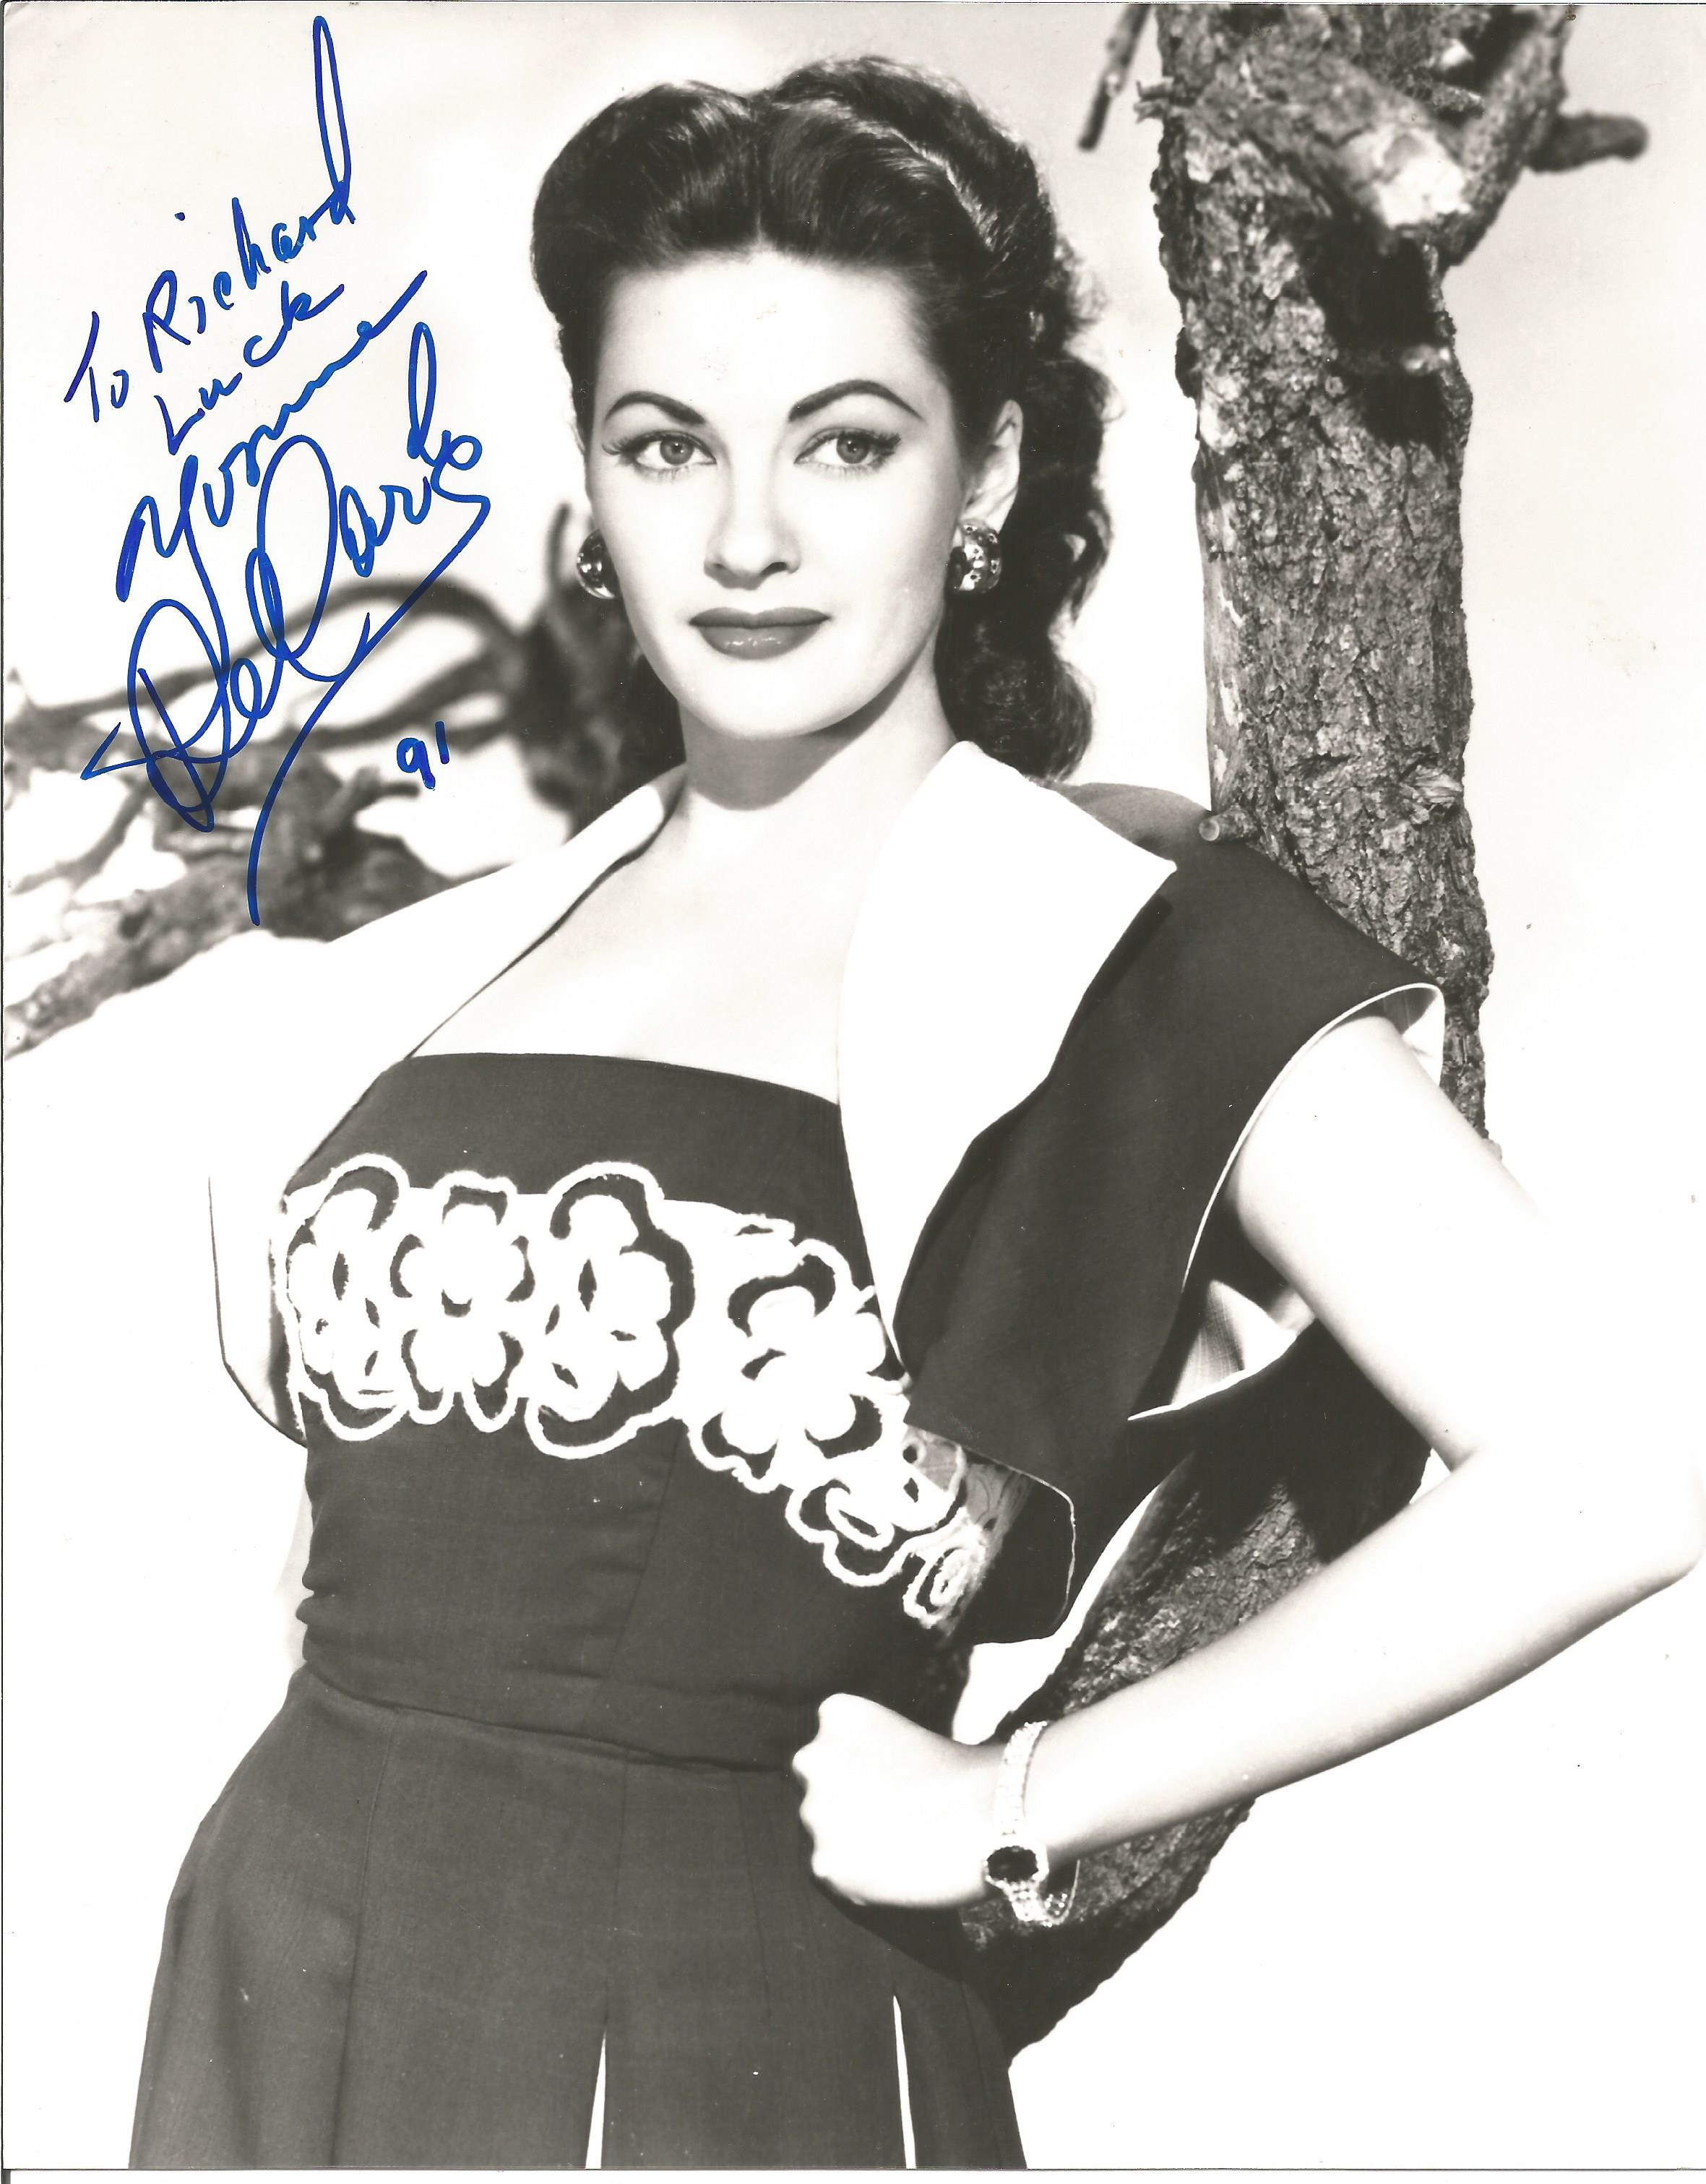 Yvonne De Carlo signed 10x8 black and white photo dedicated. Good condition. All autographs come